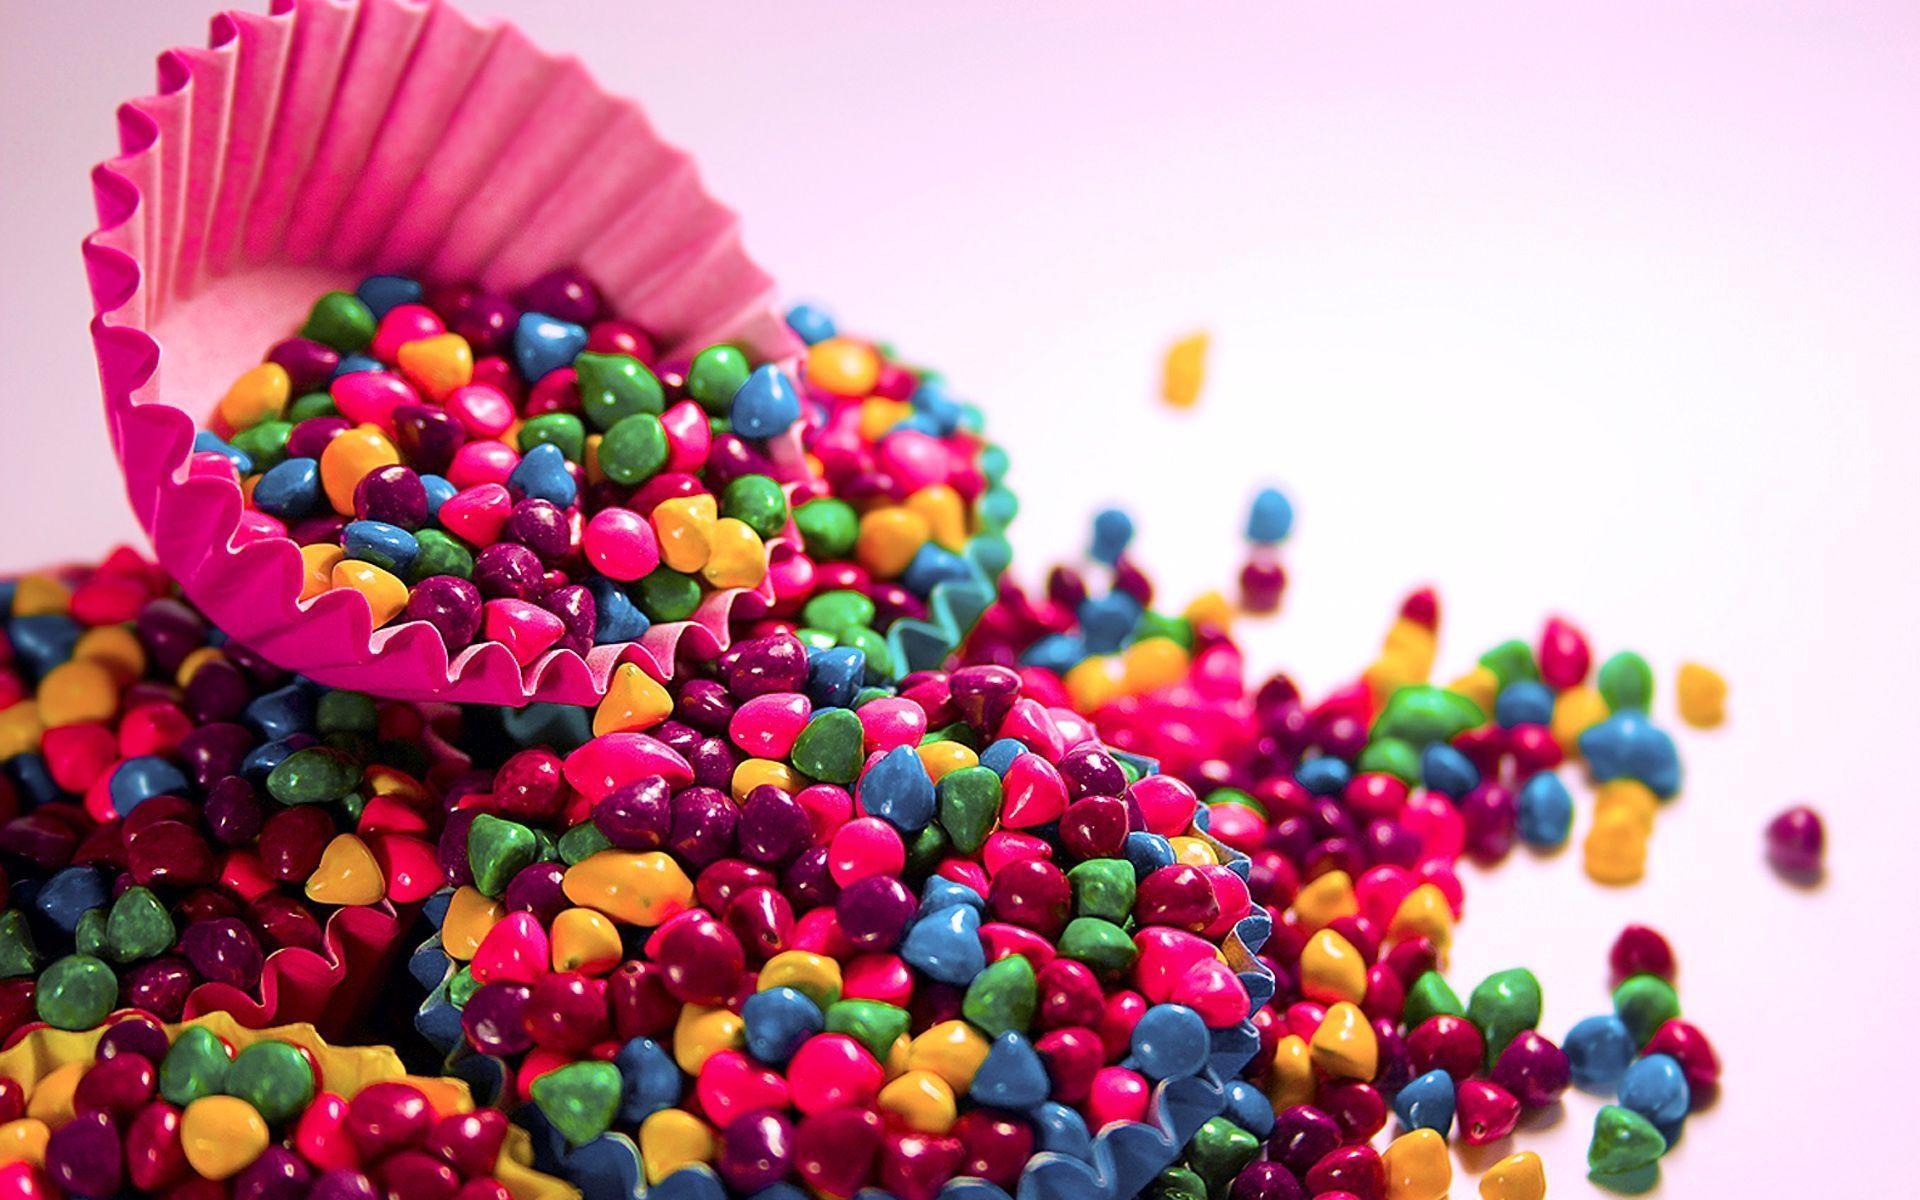 Colorful candy wallpapers, Vibrant confectionery, Playful sweets, Eye-catching candy, 1920x1200 HD Desktop